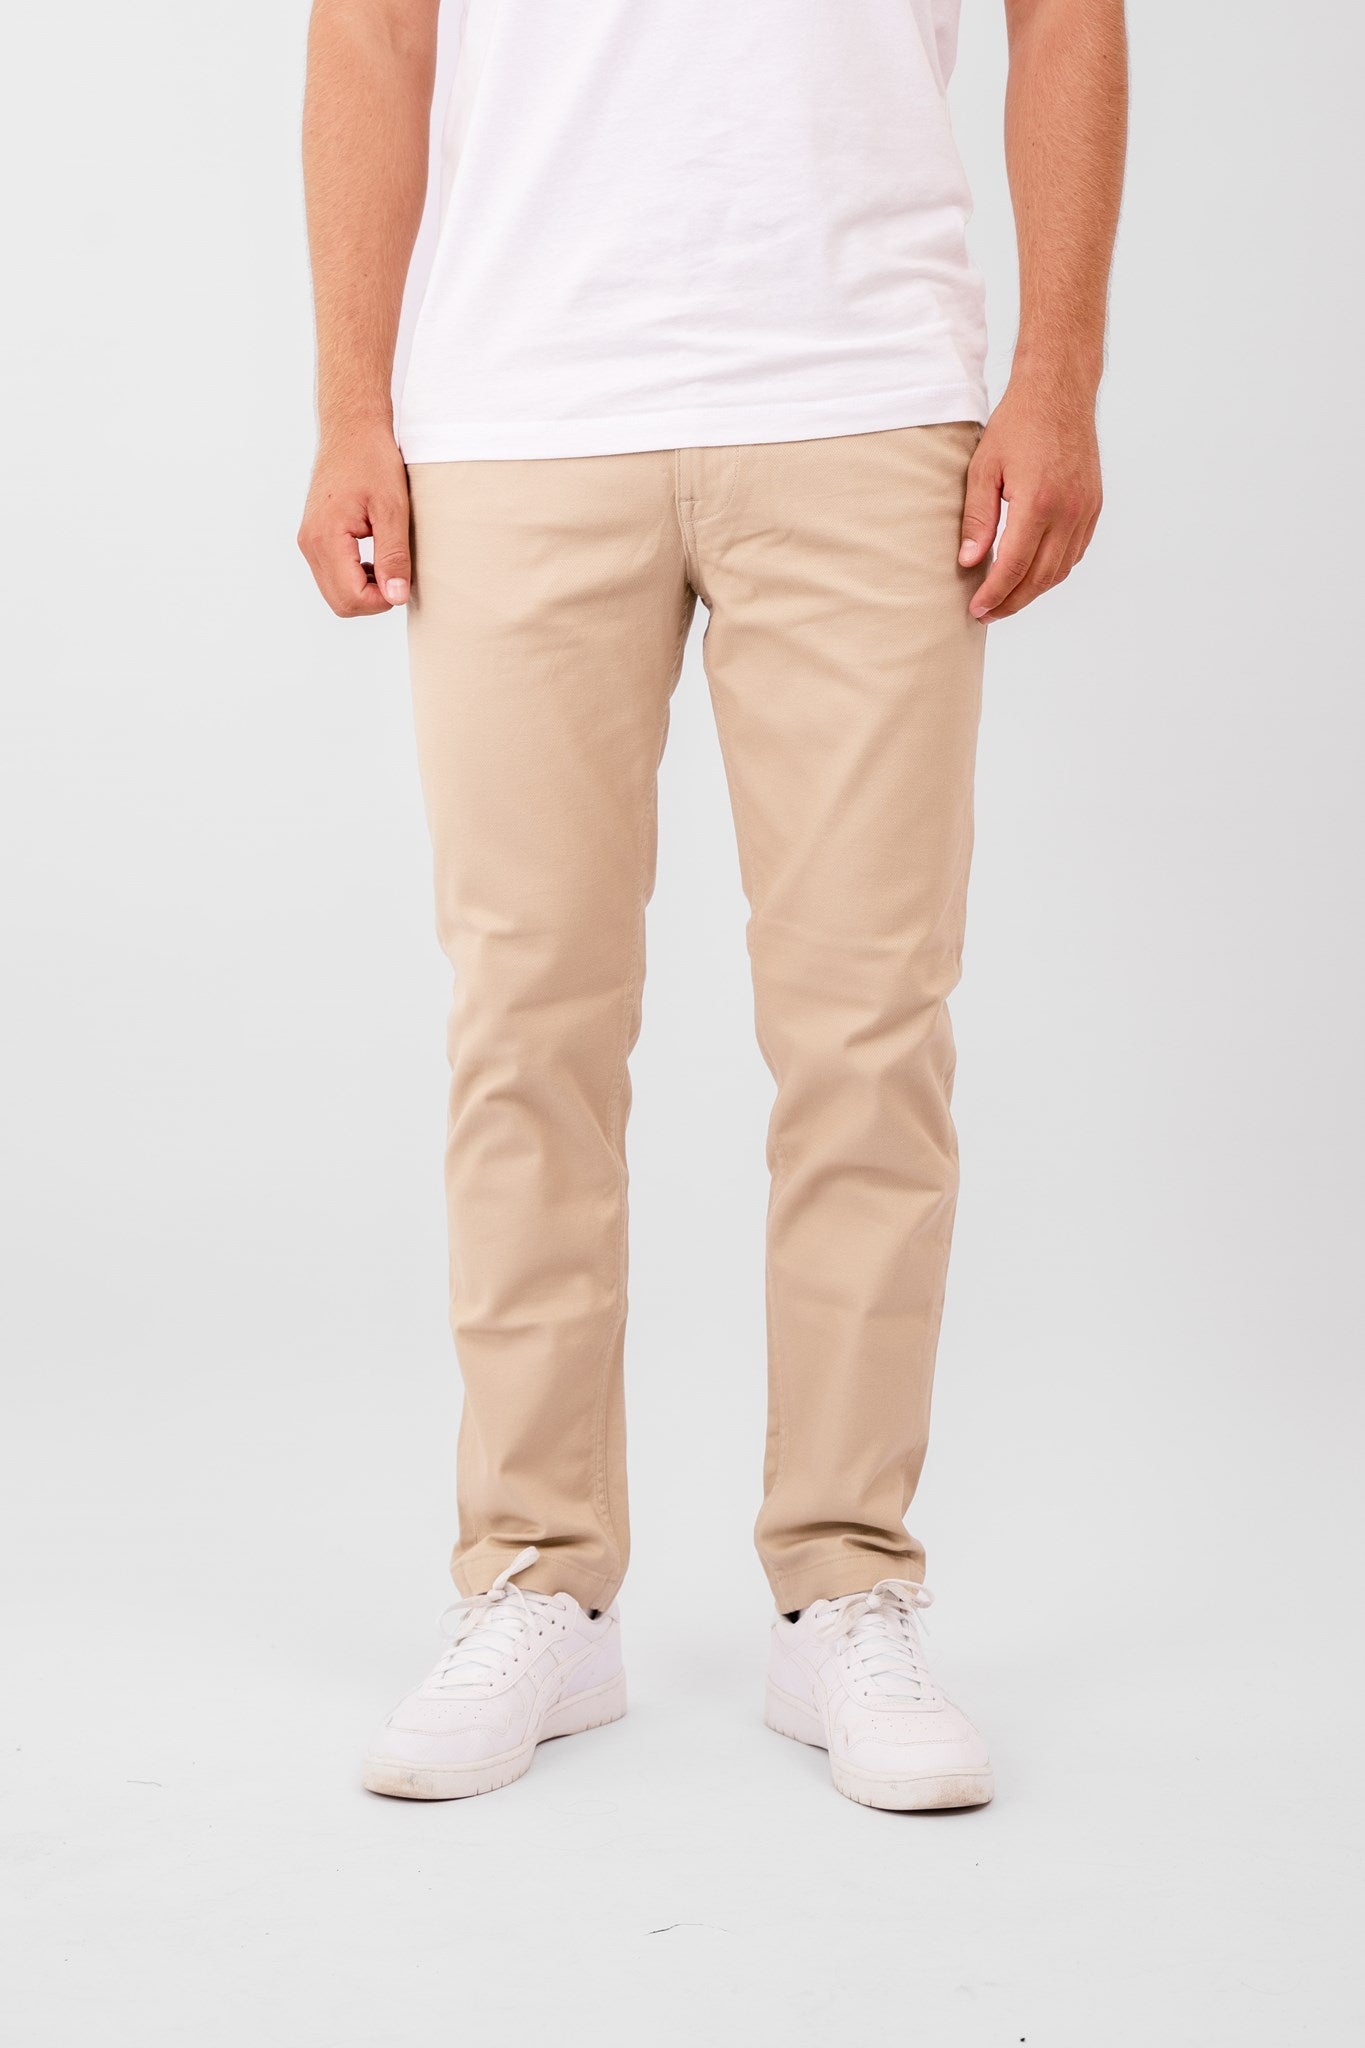 Chinos for Versatility